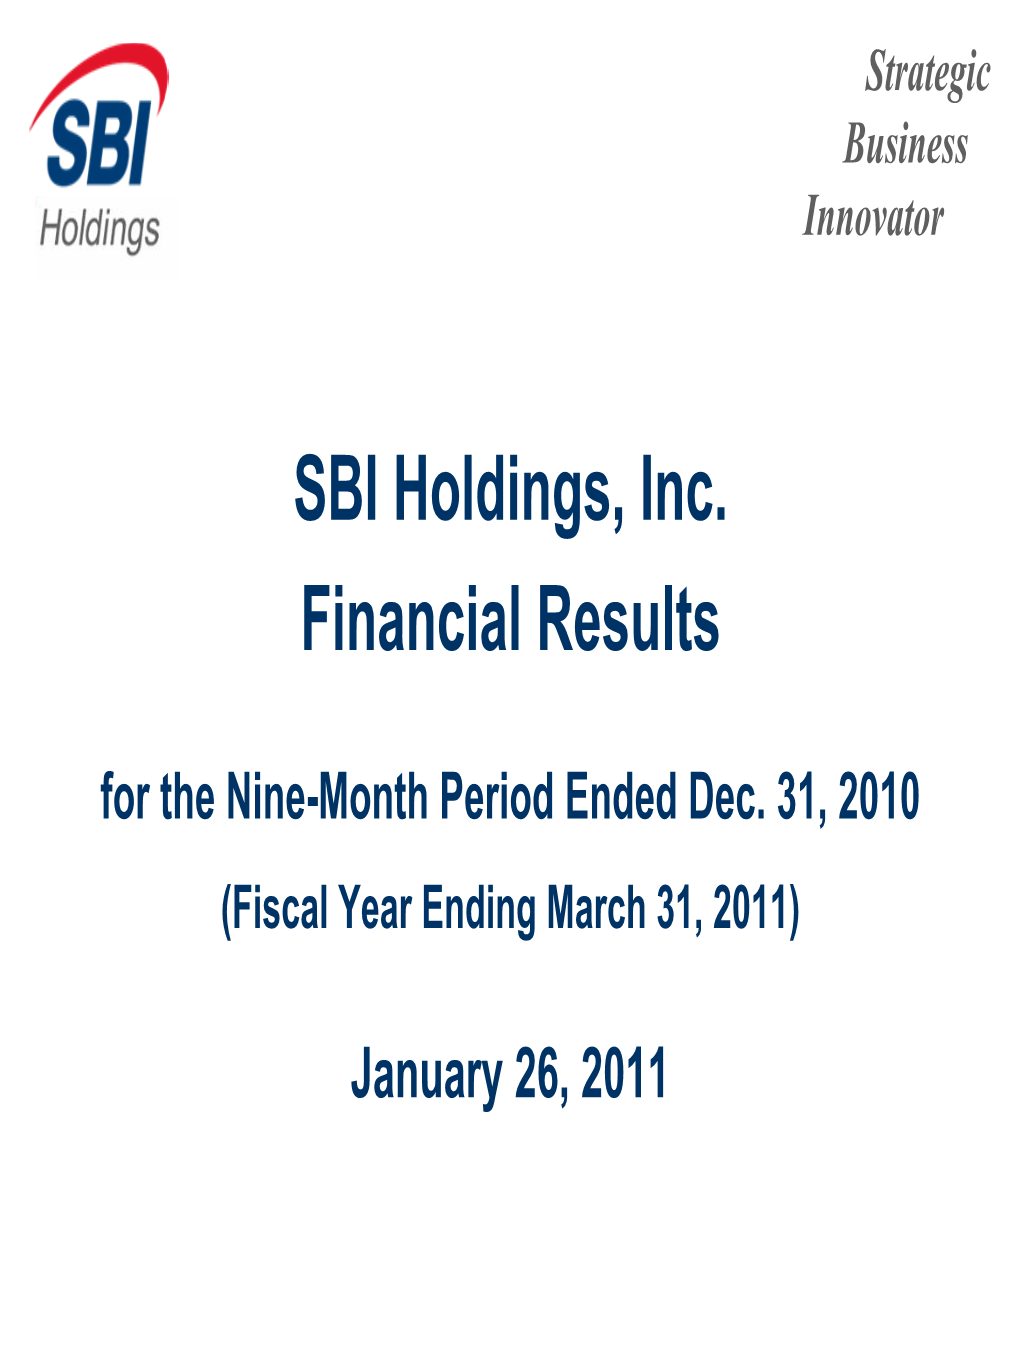 SBI Holdings, Inc. 3Rd Quarter Financial Results (Fiscal Year